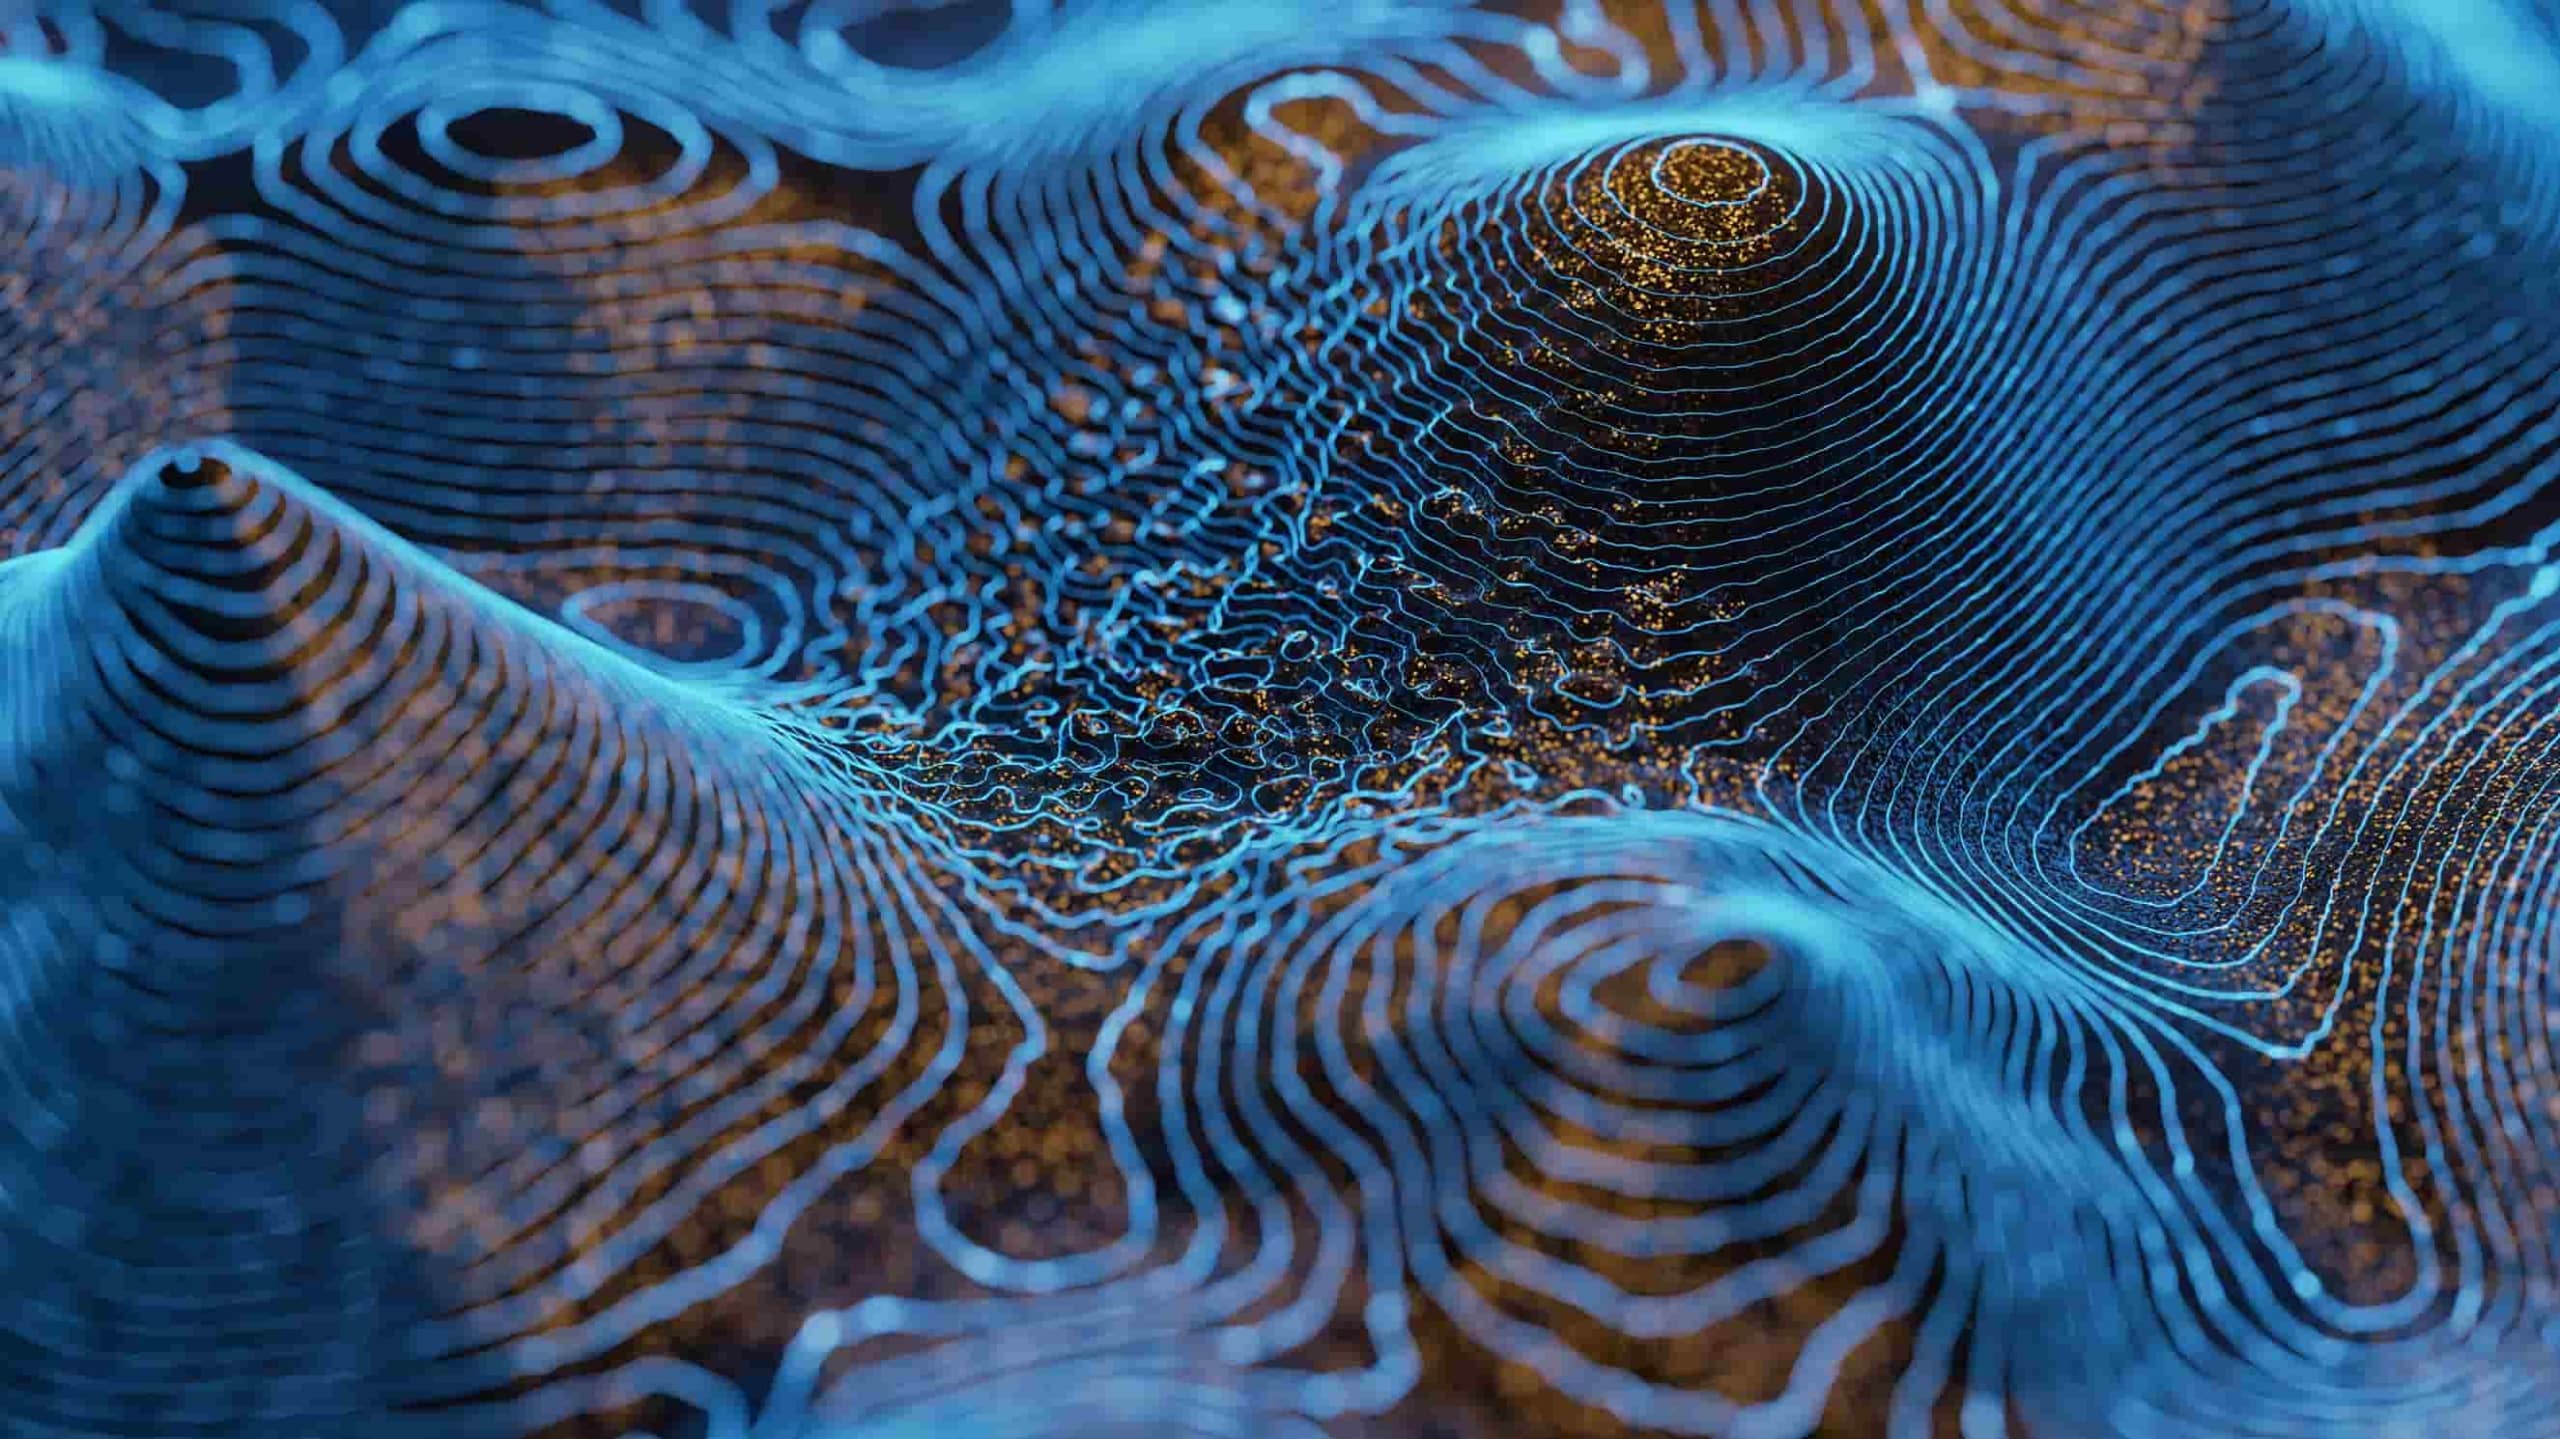 Abstract digital art depicting a topographic-like pattern in shades of blue and orange, with intricate lines resembling contour maps or waves, creating a three-dimensional effect.